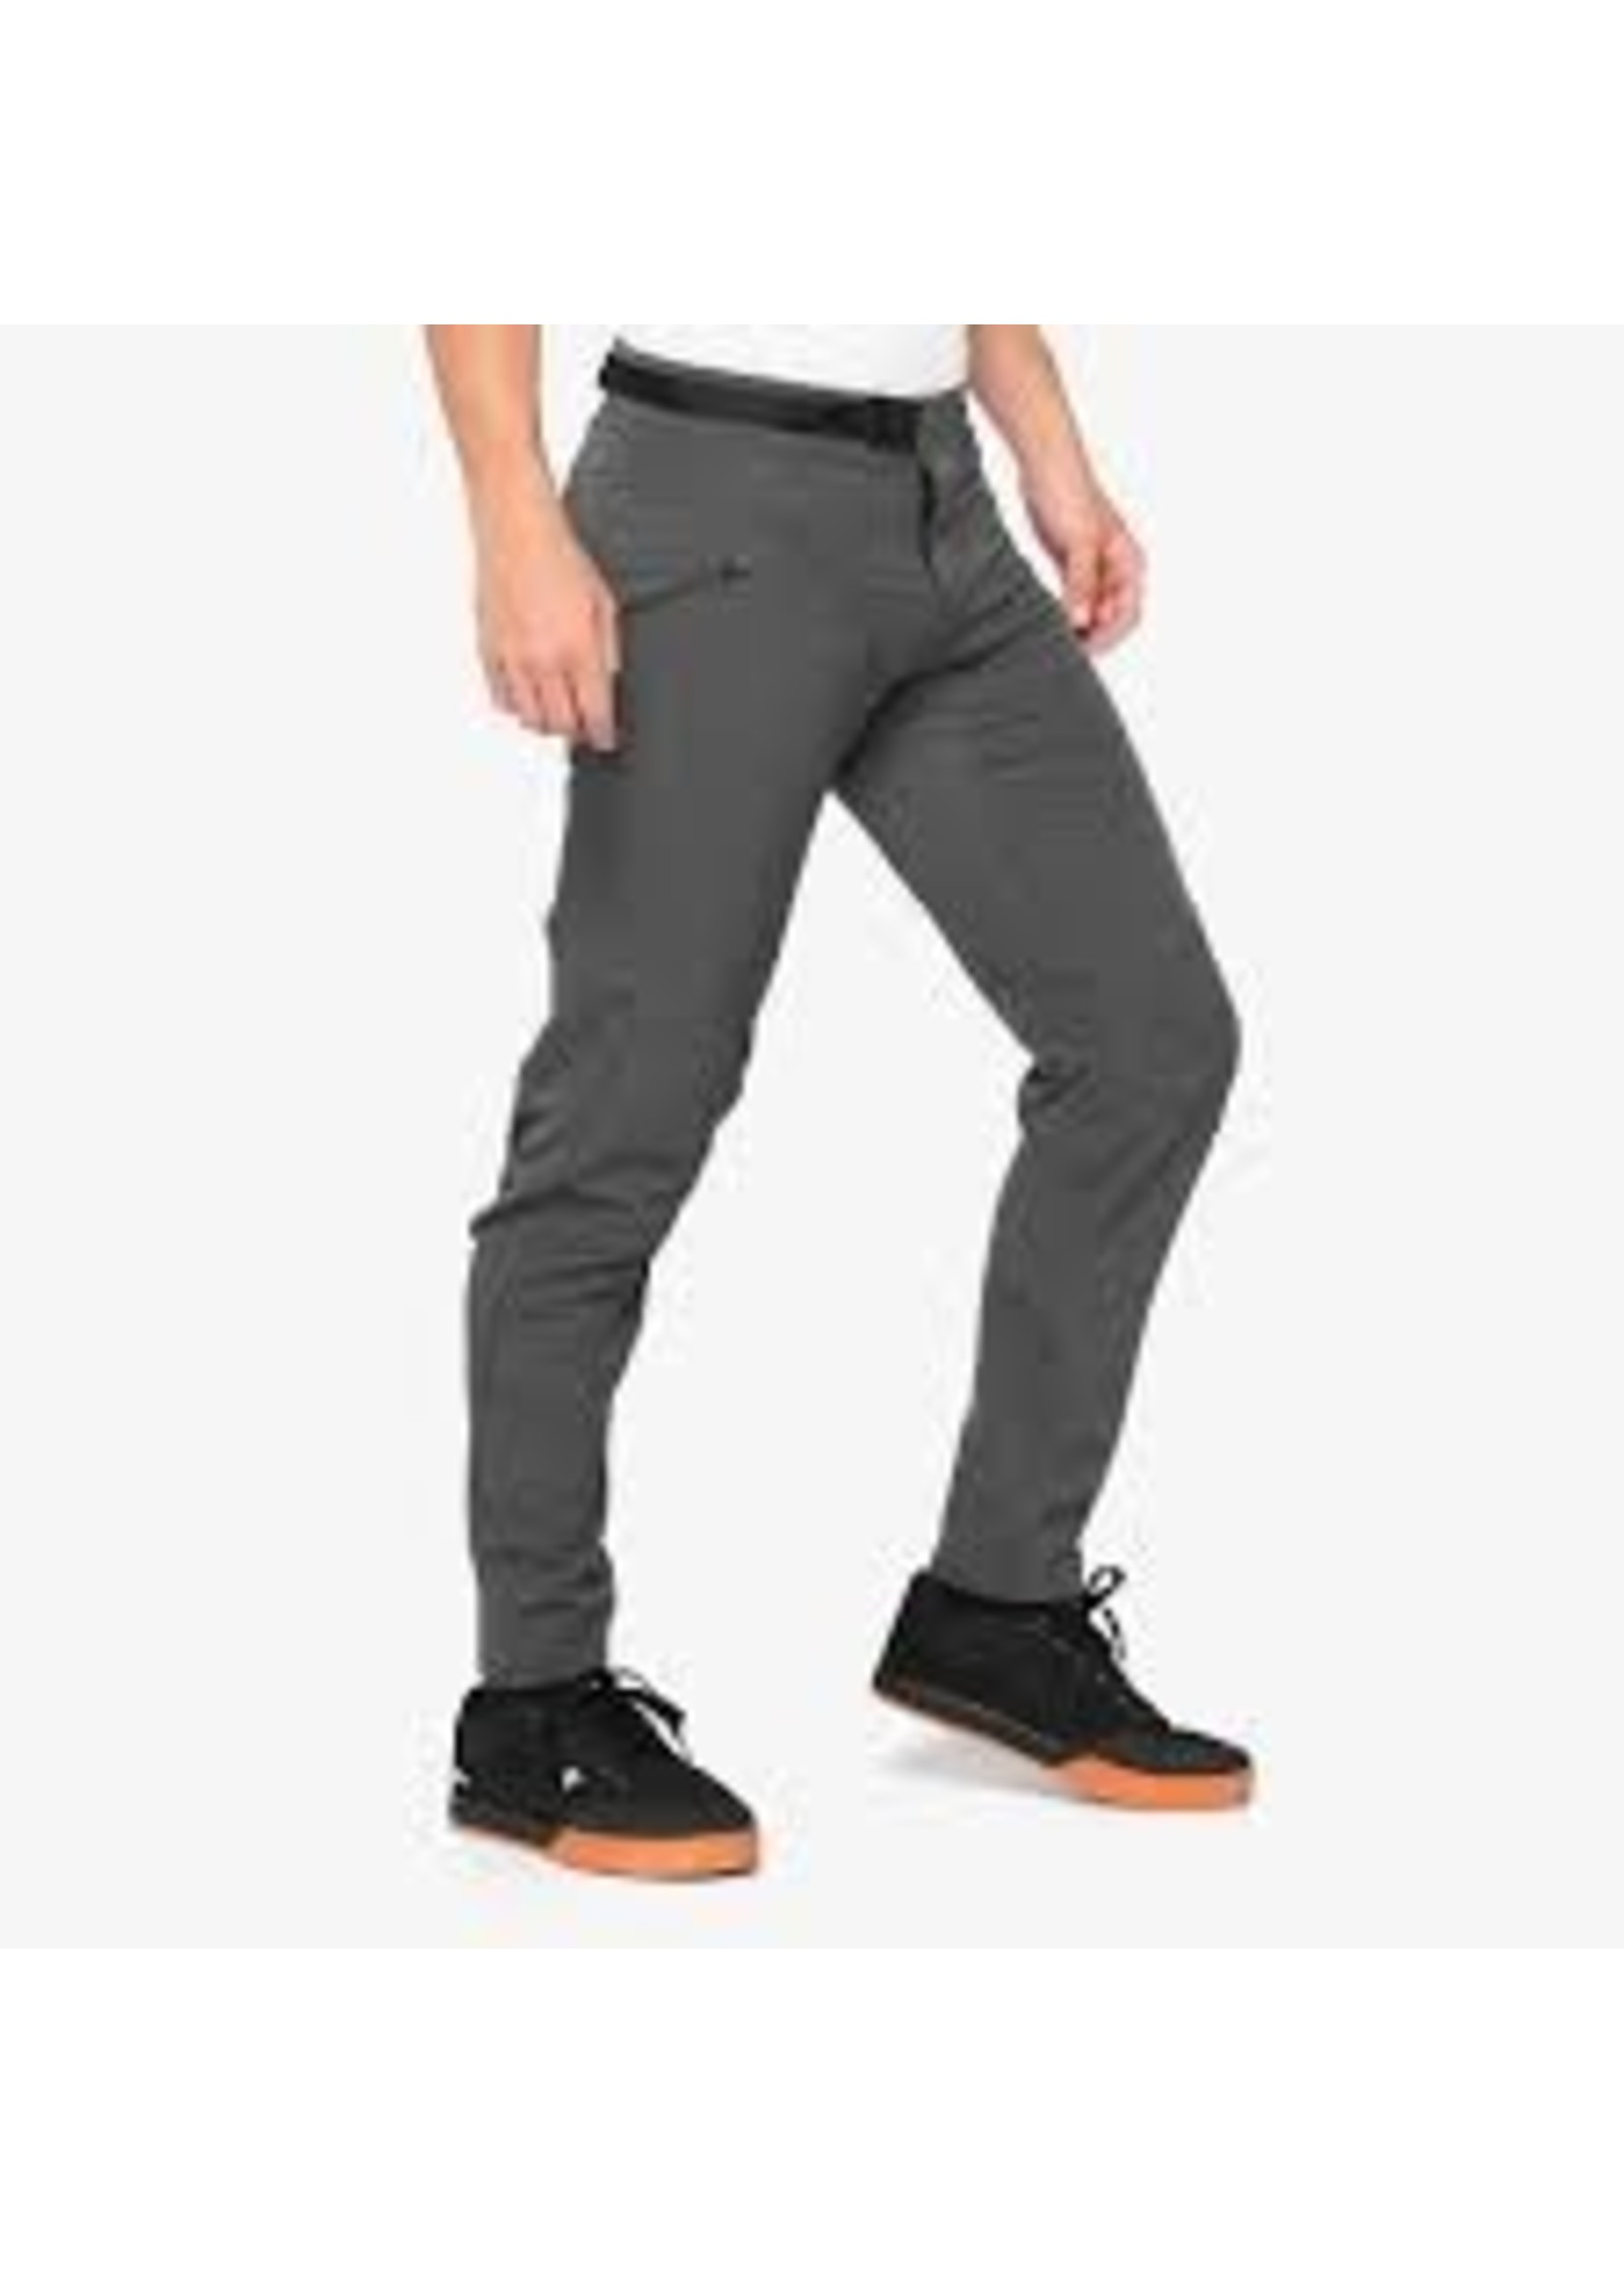 100 Percent 100% Airmatic All Mountain Pants, Charcoal